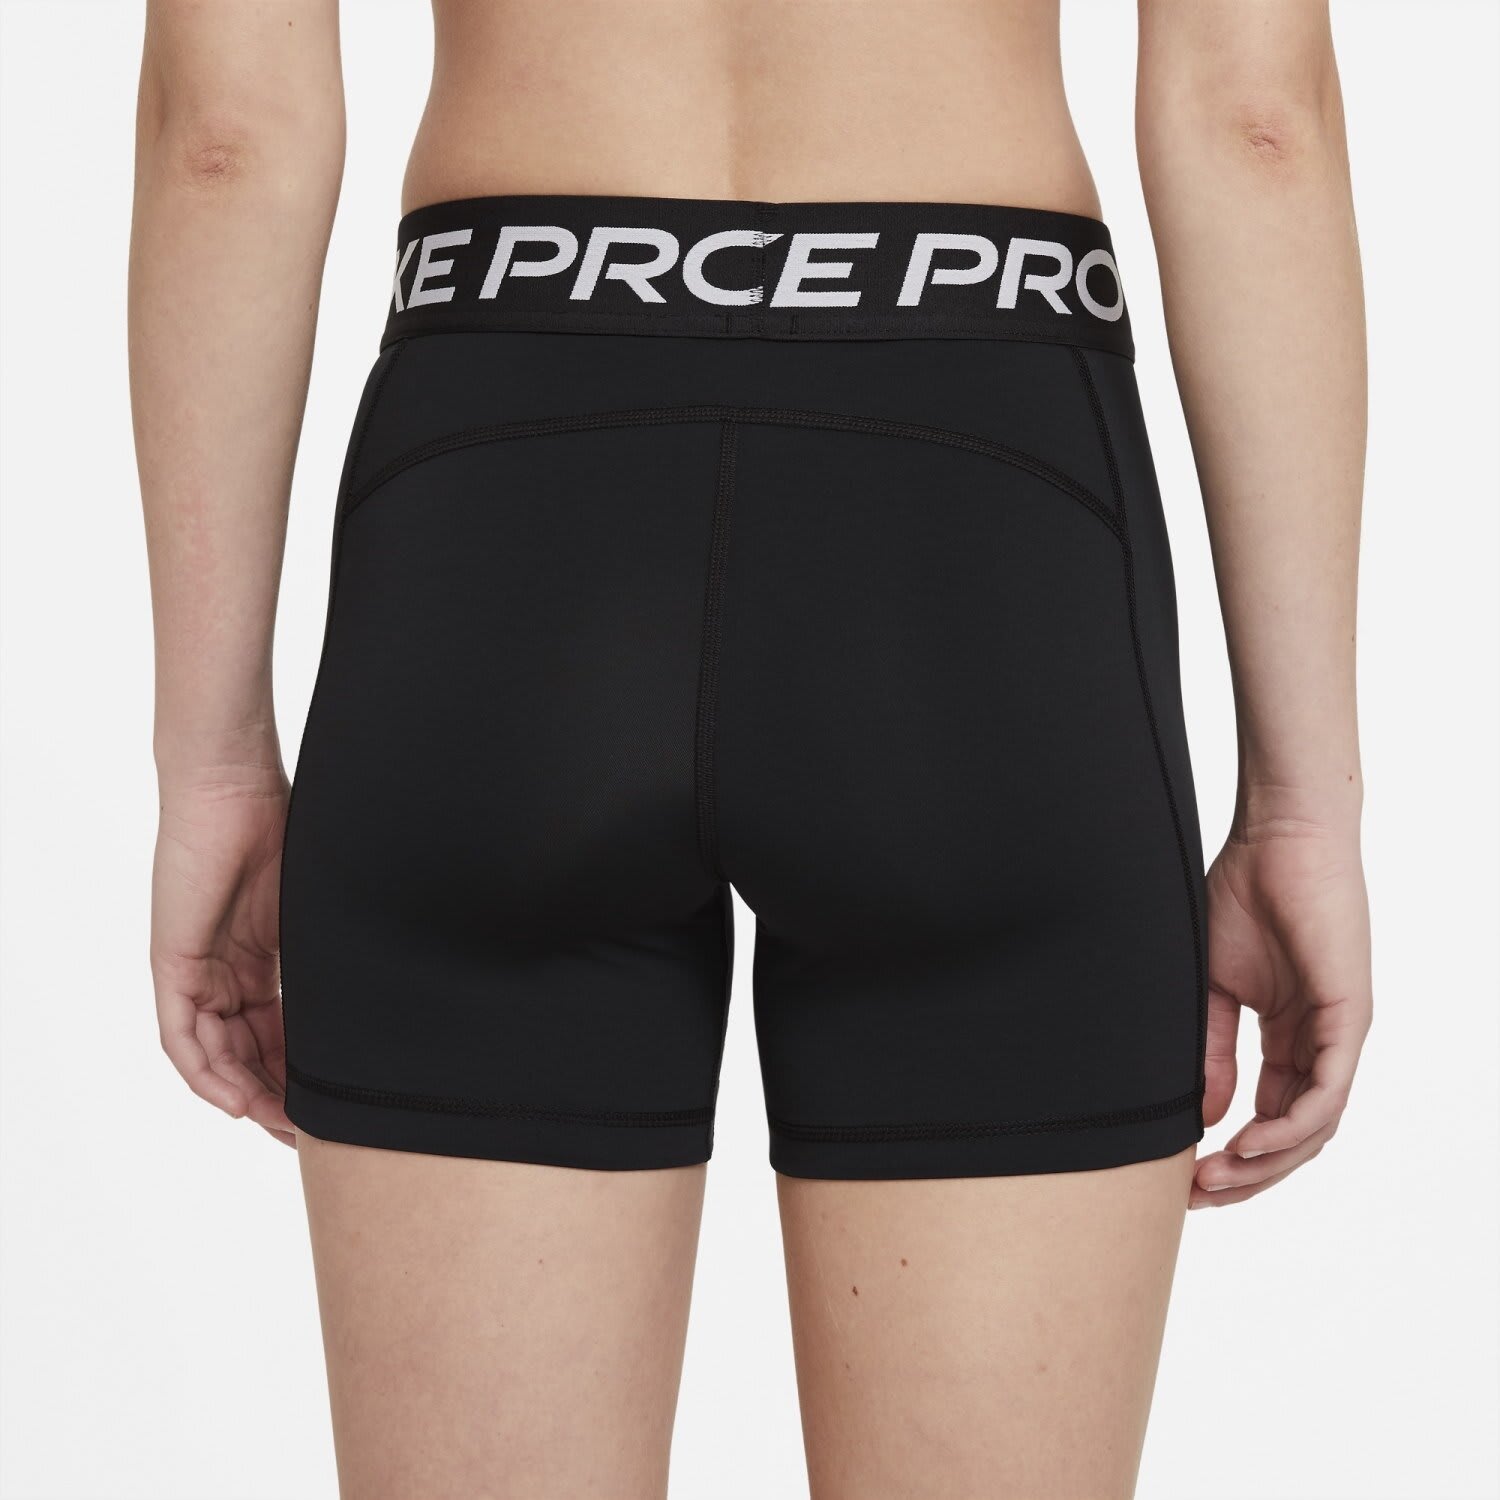 Nike Women's Pro Cool 5 Inch Short Tight, by Nike